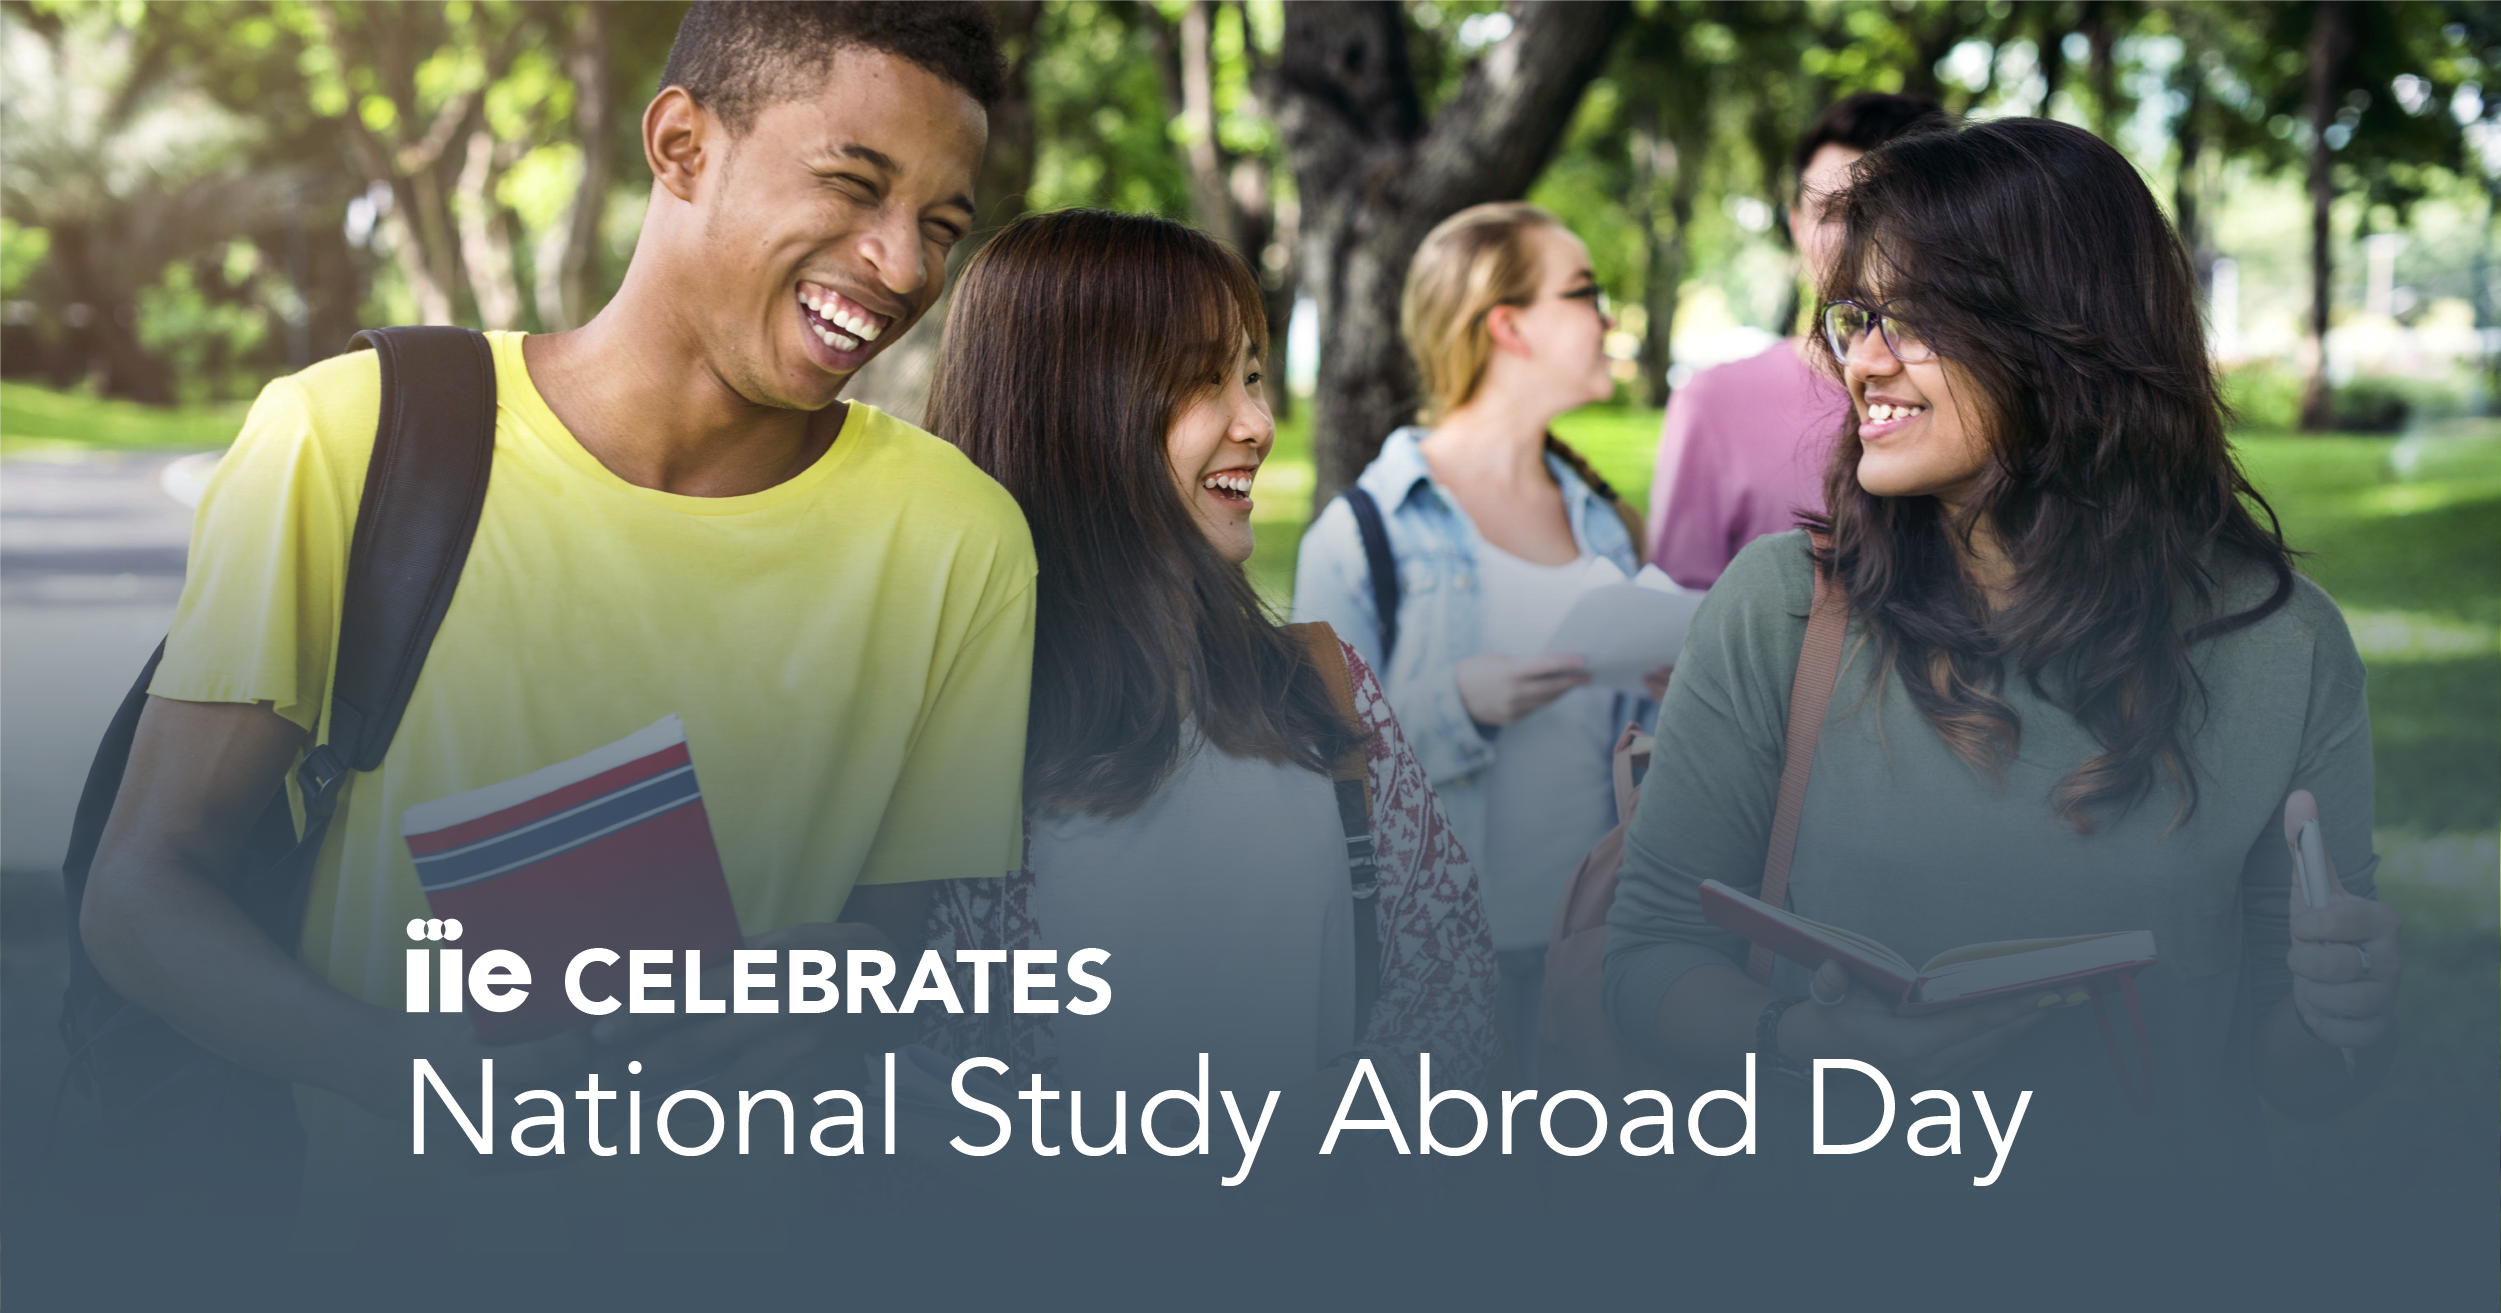 Picture of students walking and laughing with writing at bottom of photo saying "IIE Celebrates National Study Abroad Day."